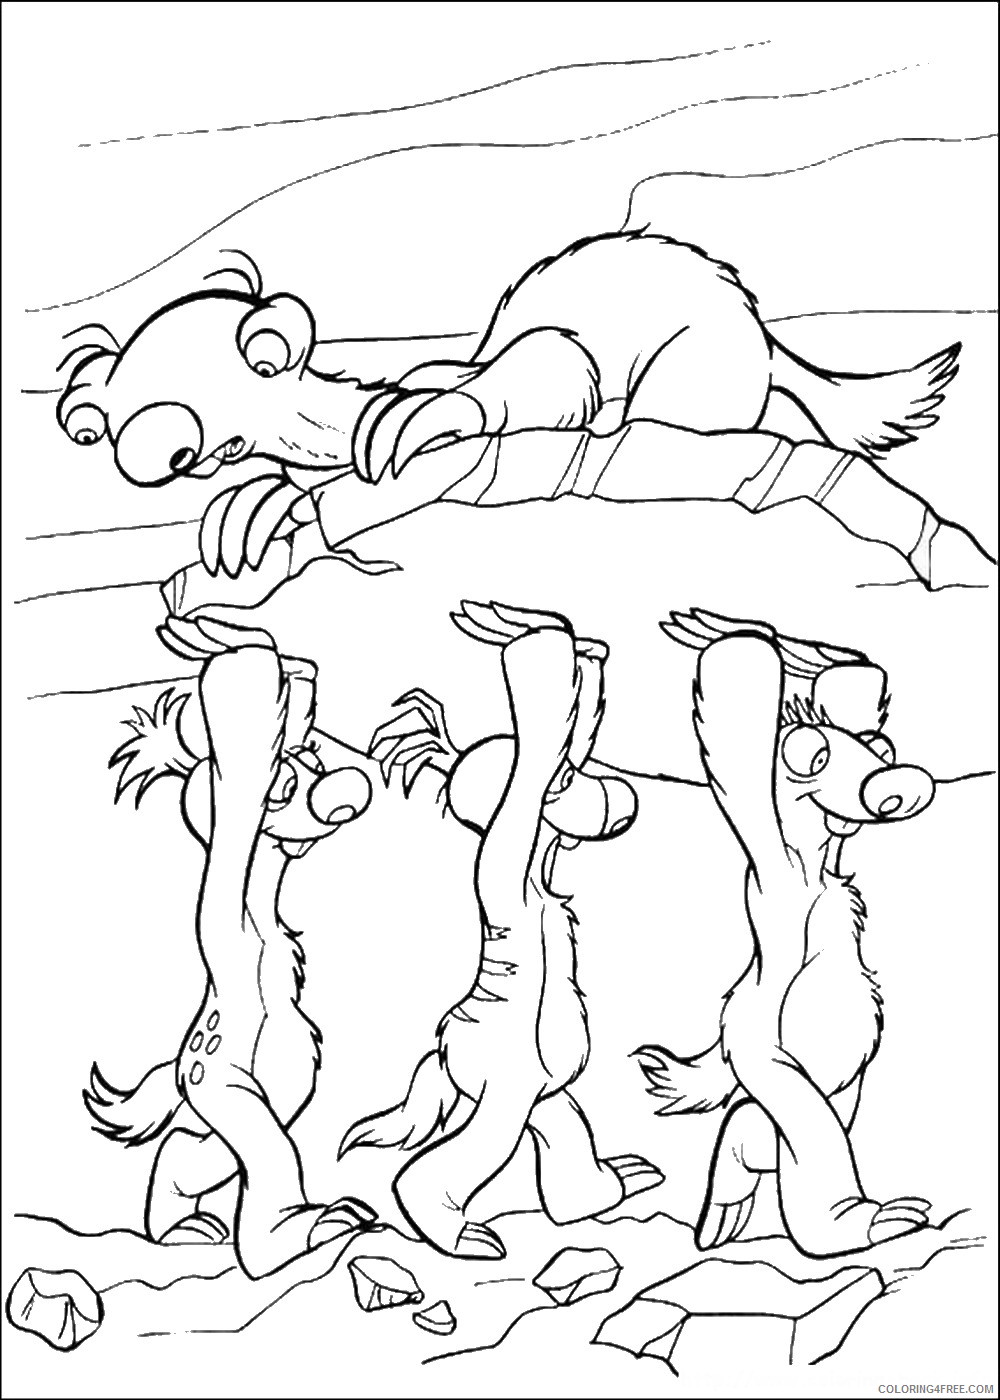 Ice Age Coloring Pages Cartoons ice age 10 Printable 2020 3381 Coloring4free